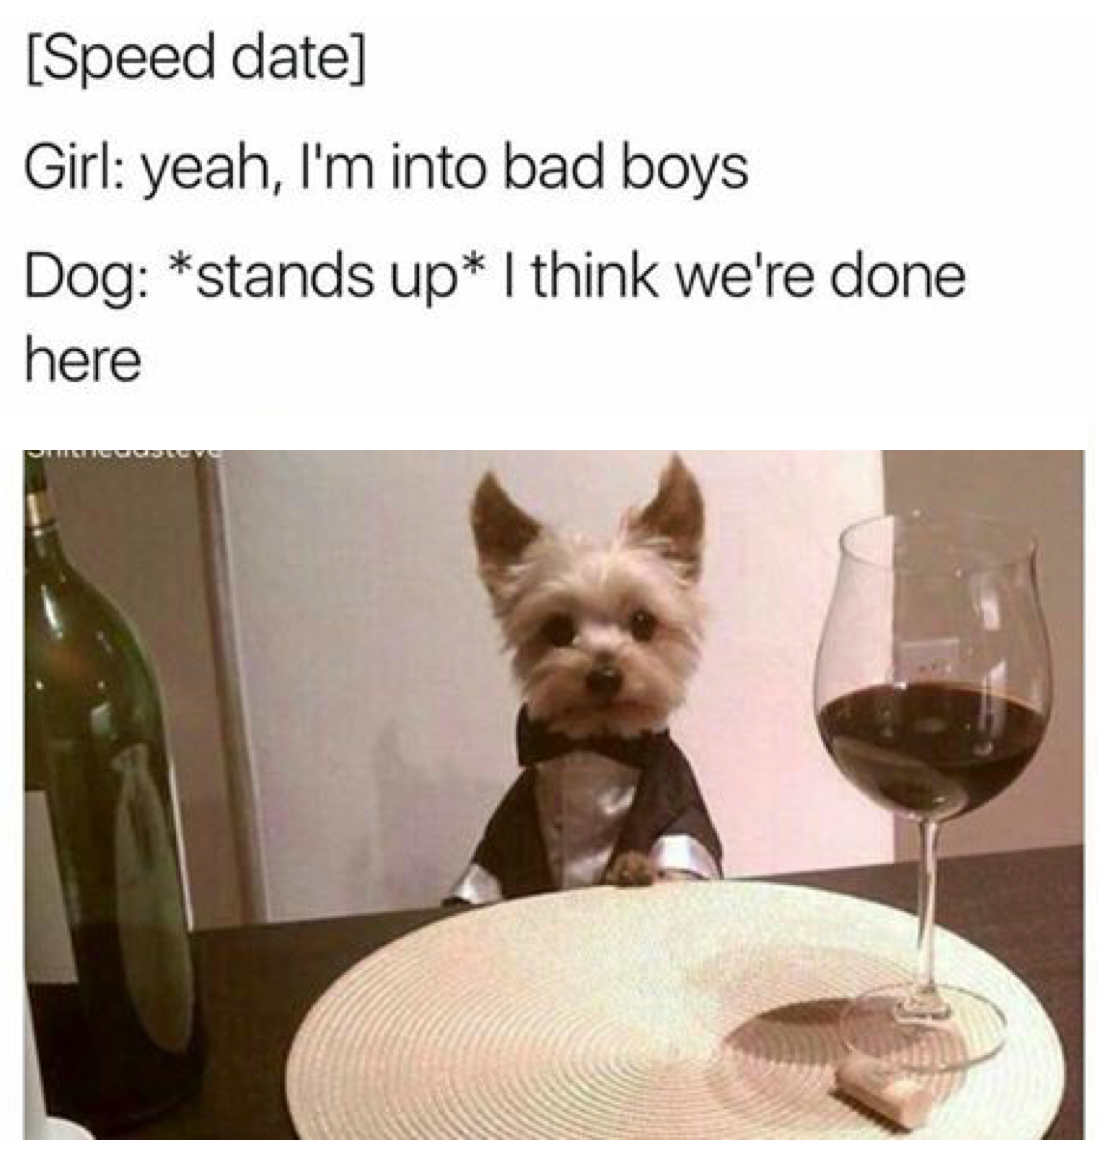 good boy memes - Speed date Girl yeah, I'm into bad boys Dog stands up I think we're done here